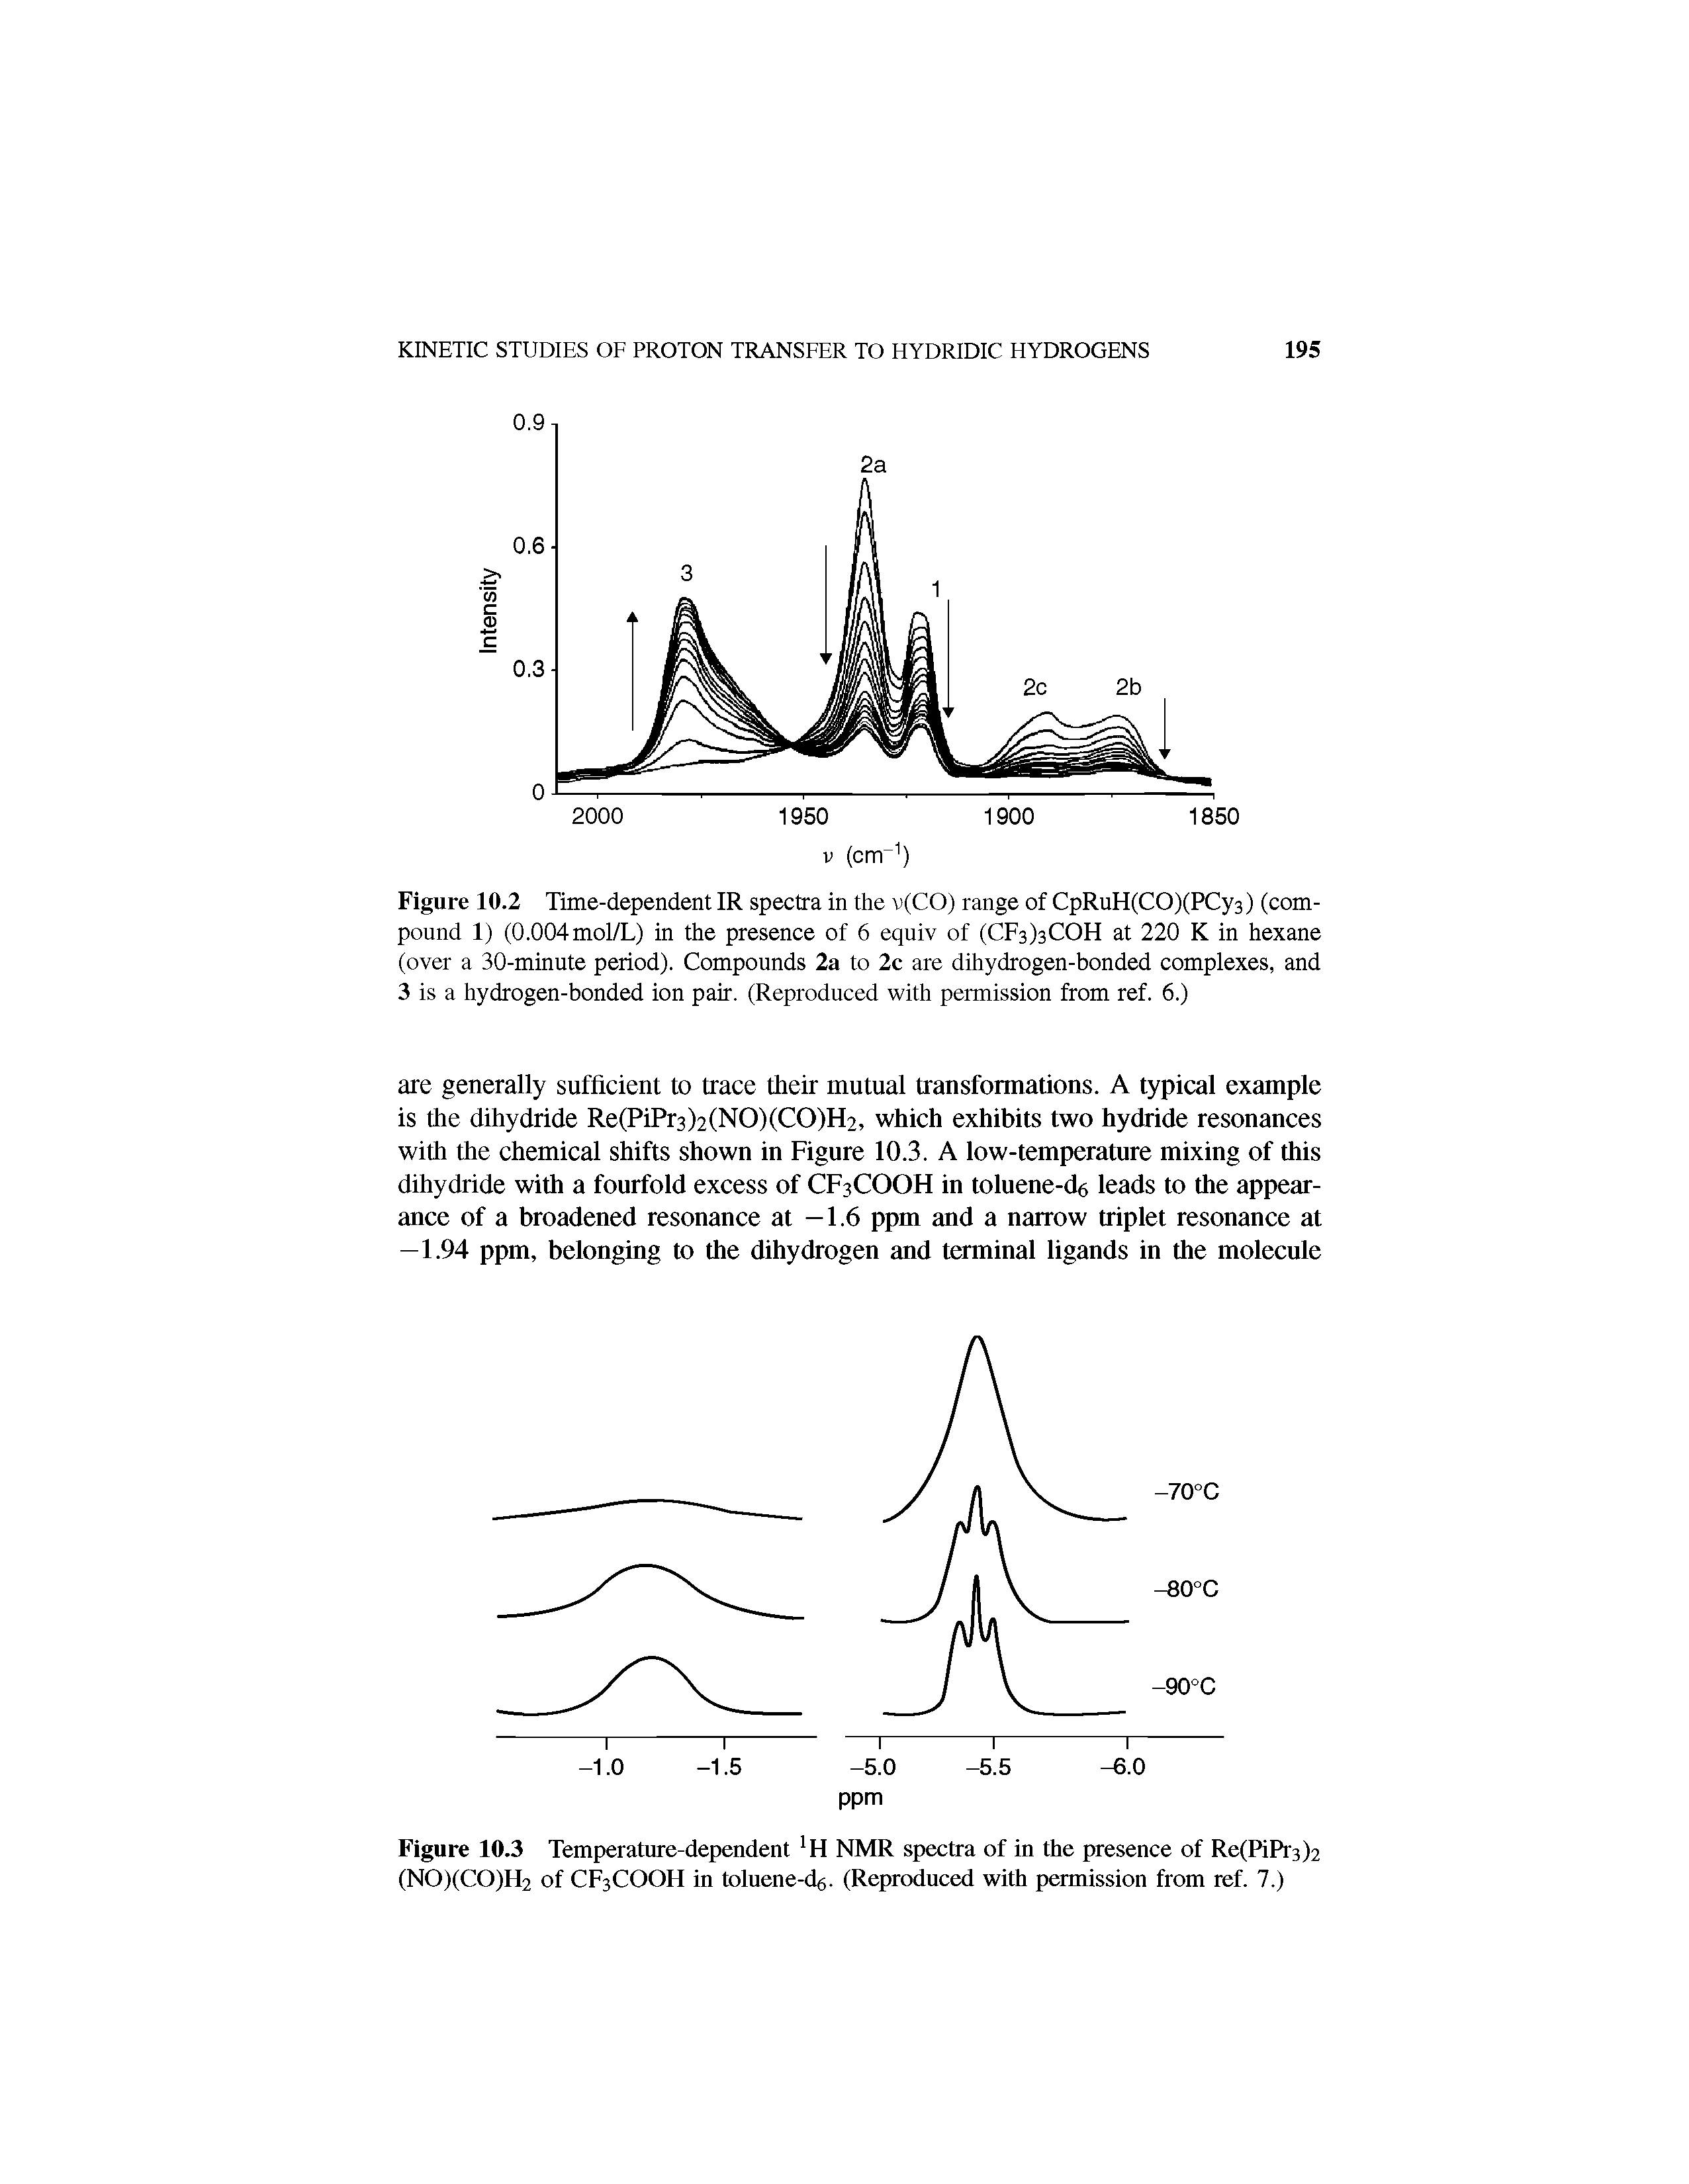 Figure 10.2 Time-dependent IR spectra in the v(CO) range of CpRuH(CO)(PCy3) (compound 1) (0.004mol/L) in the presence of 6 equiv of (CF3)3COH at 220 K in hexane (over a 30-minute period). Compounds 2a to 2c are dihydrogen-bonded complexes, and 3 is a hydrogen-bonded ion pair. (Reproduced with permission from ref. 6.)...